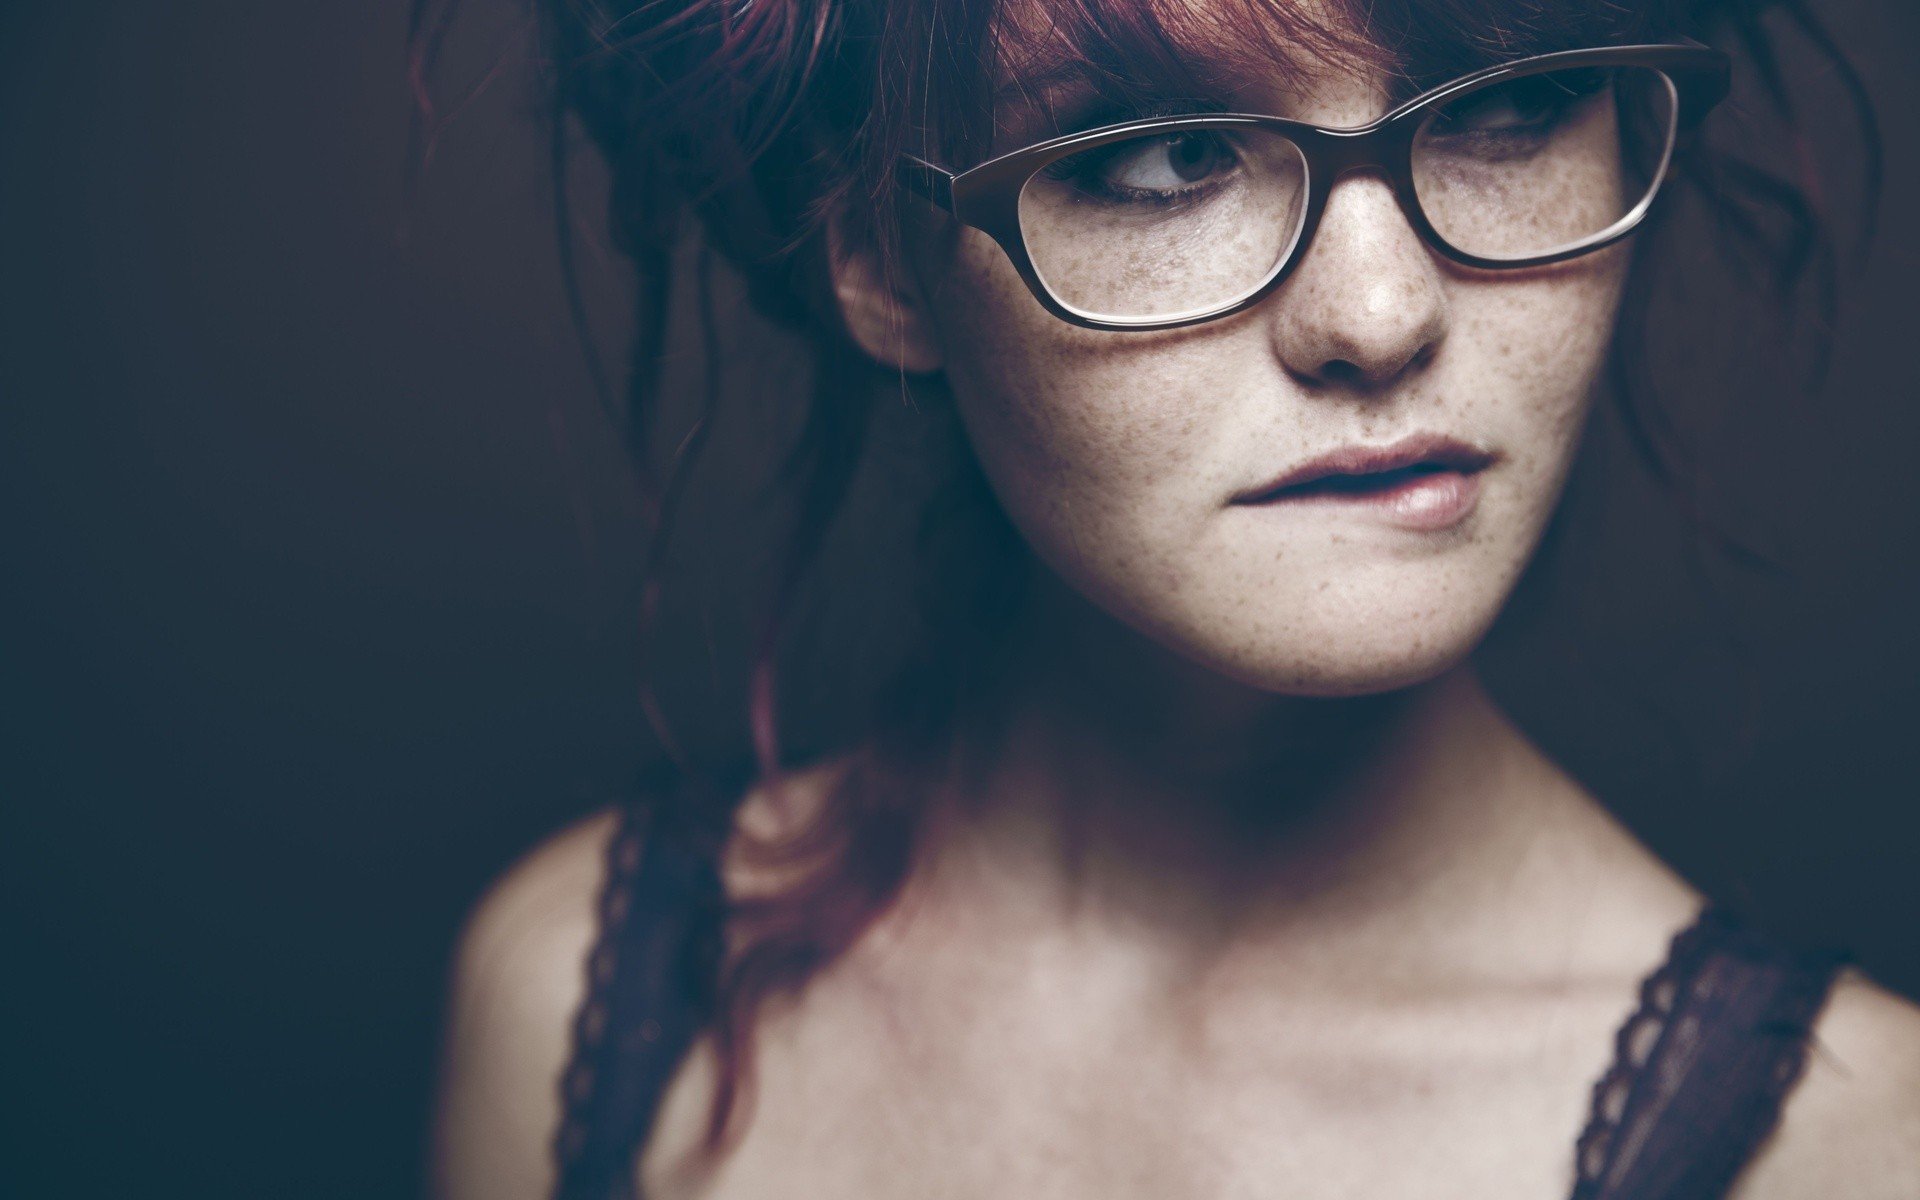 women, Face, Freckles, Biting lip, Redhead, Glasses, Women with glasses Wallpaper